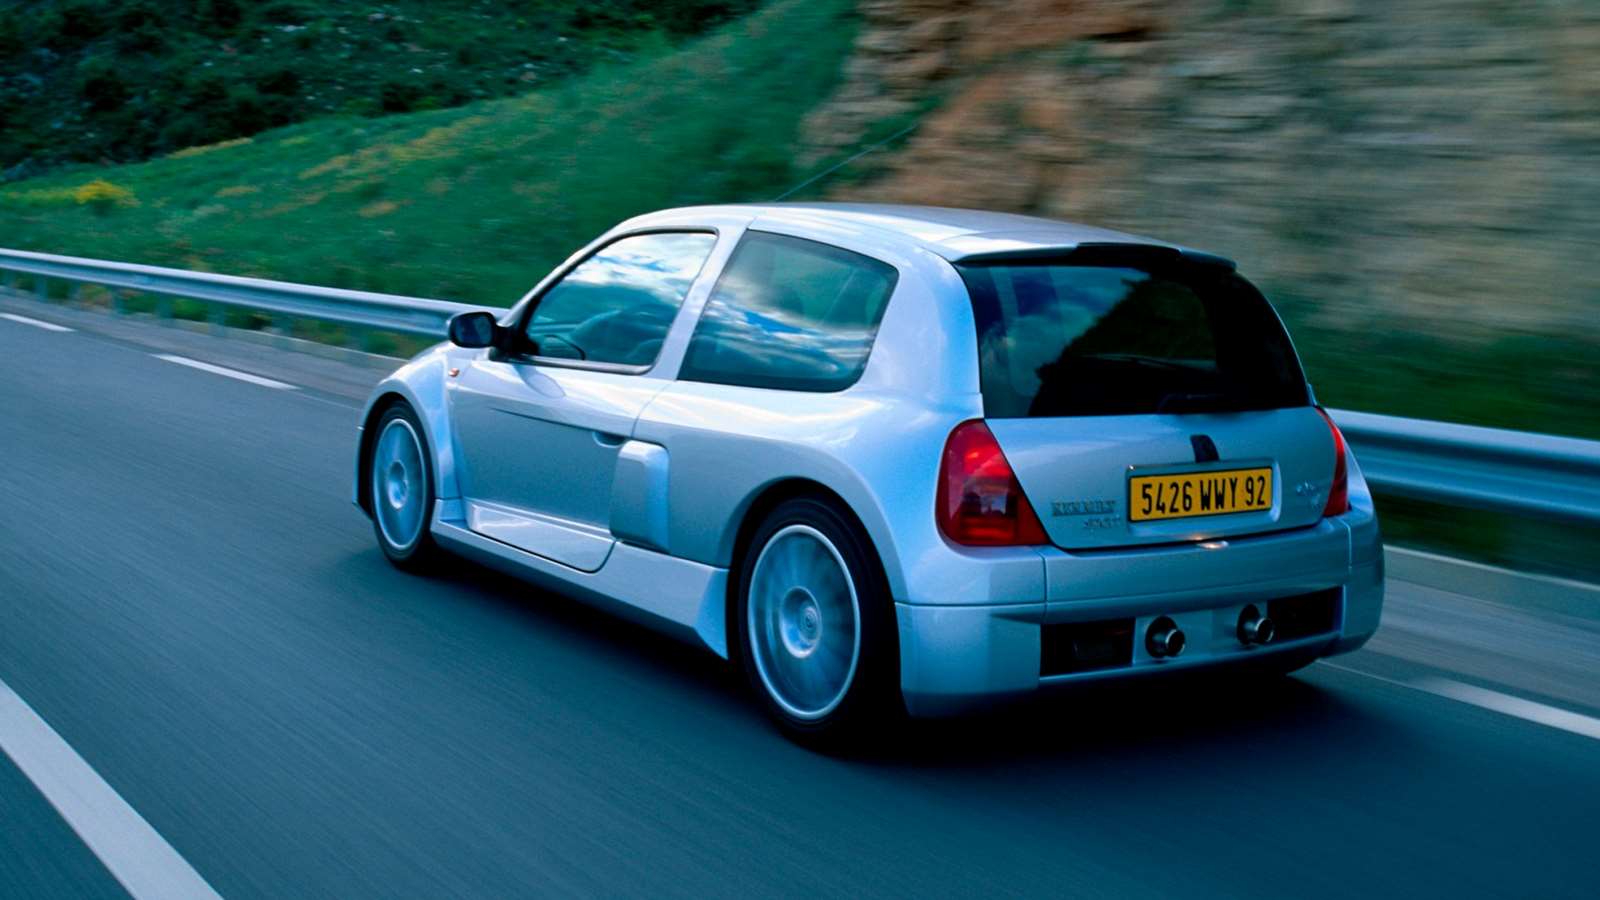 The Clio V6 is the scariest car I've ever driven